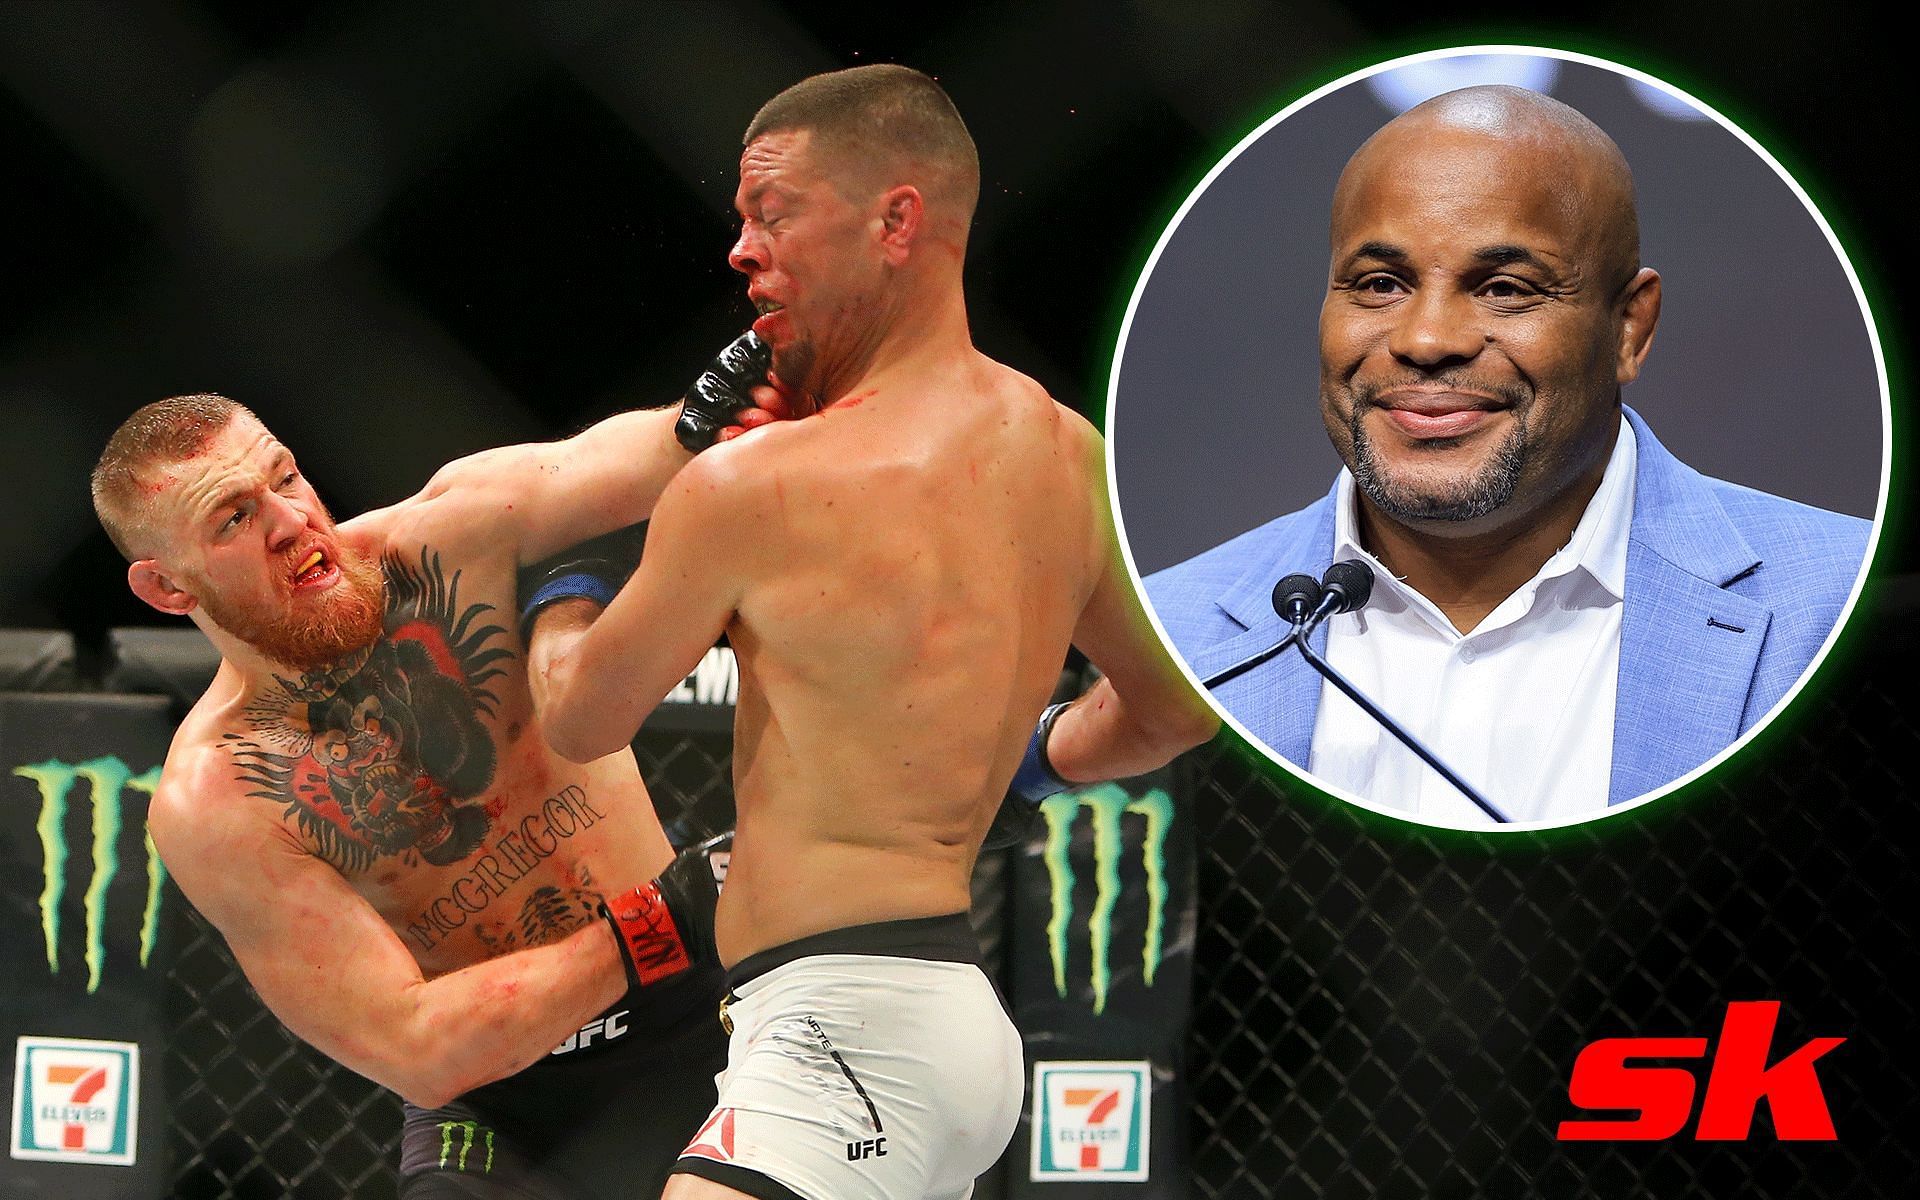 Conor McGregor (left) punches Nate Diaz (middle) during their fight at UFC 196; Daniel Cormier (right) [Images courtesy: Getty Images]